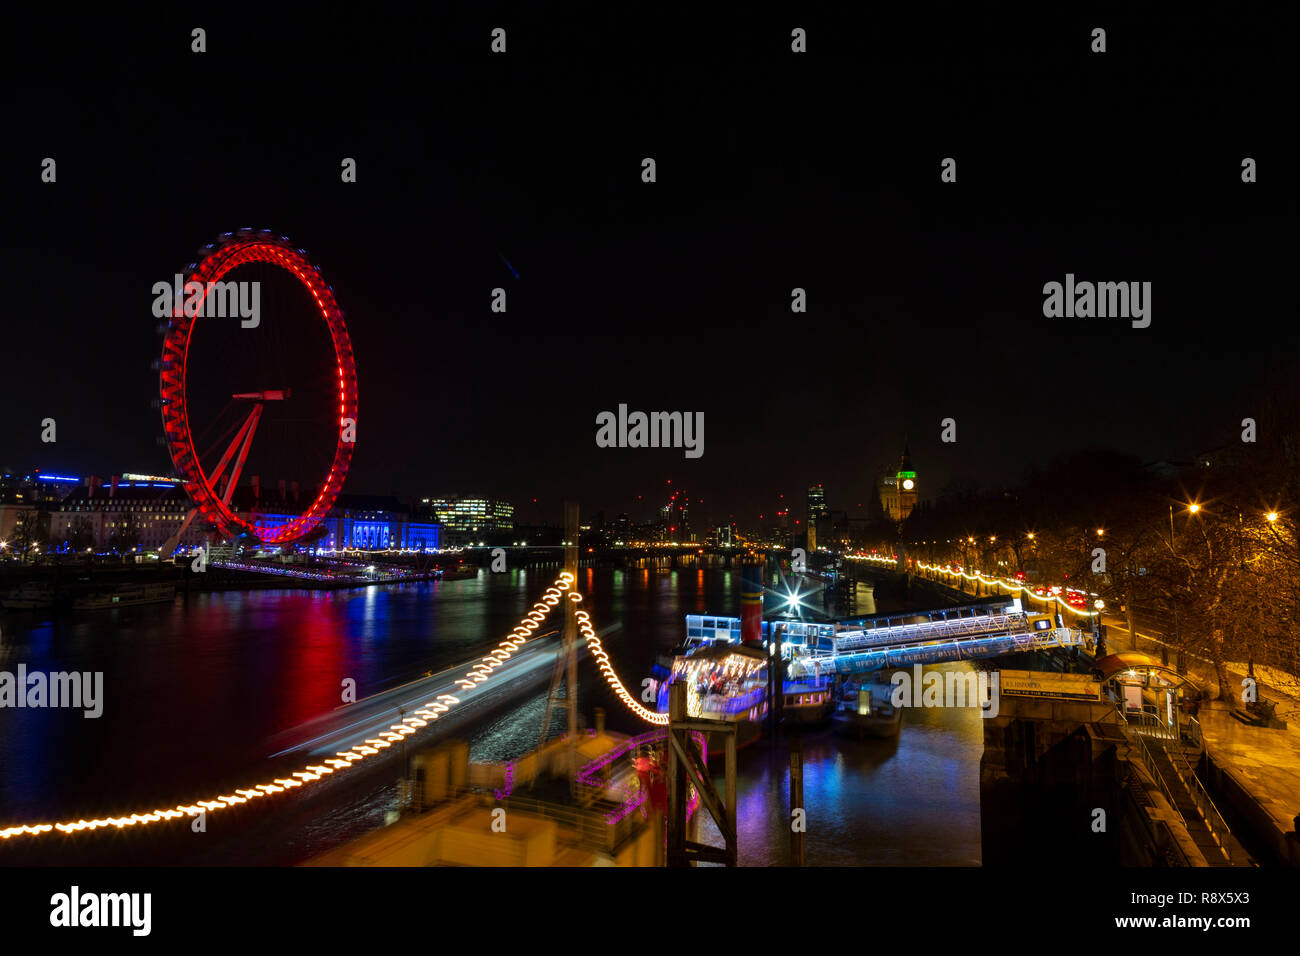 London Eye or Millenium Wheel, is a 135-meter observation wheel from where you can have spectacular views of London, at night and red is spectacular Stock Photo